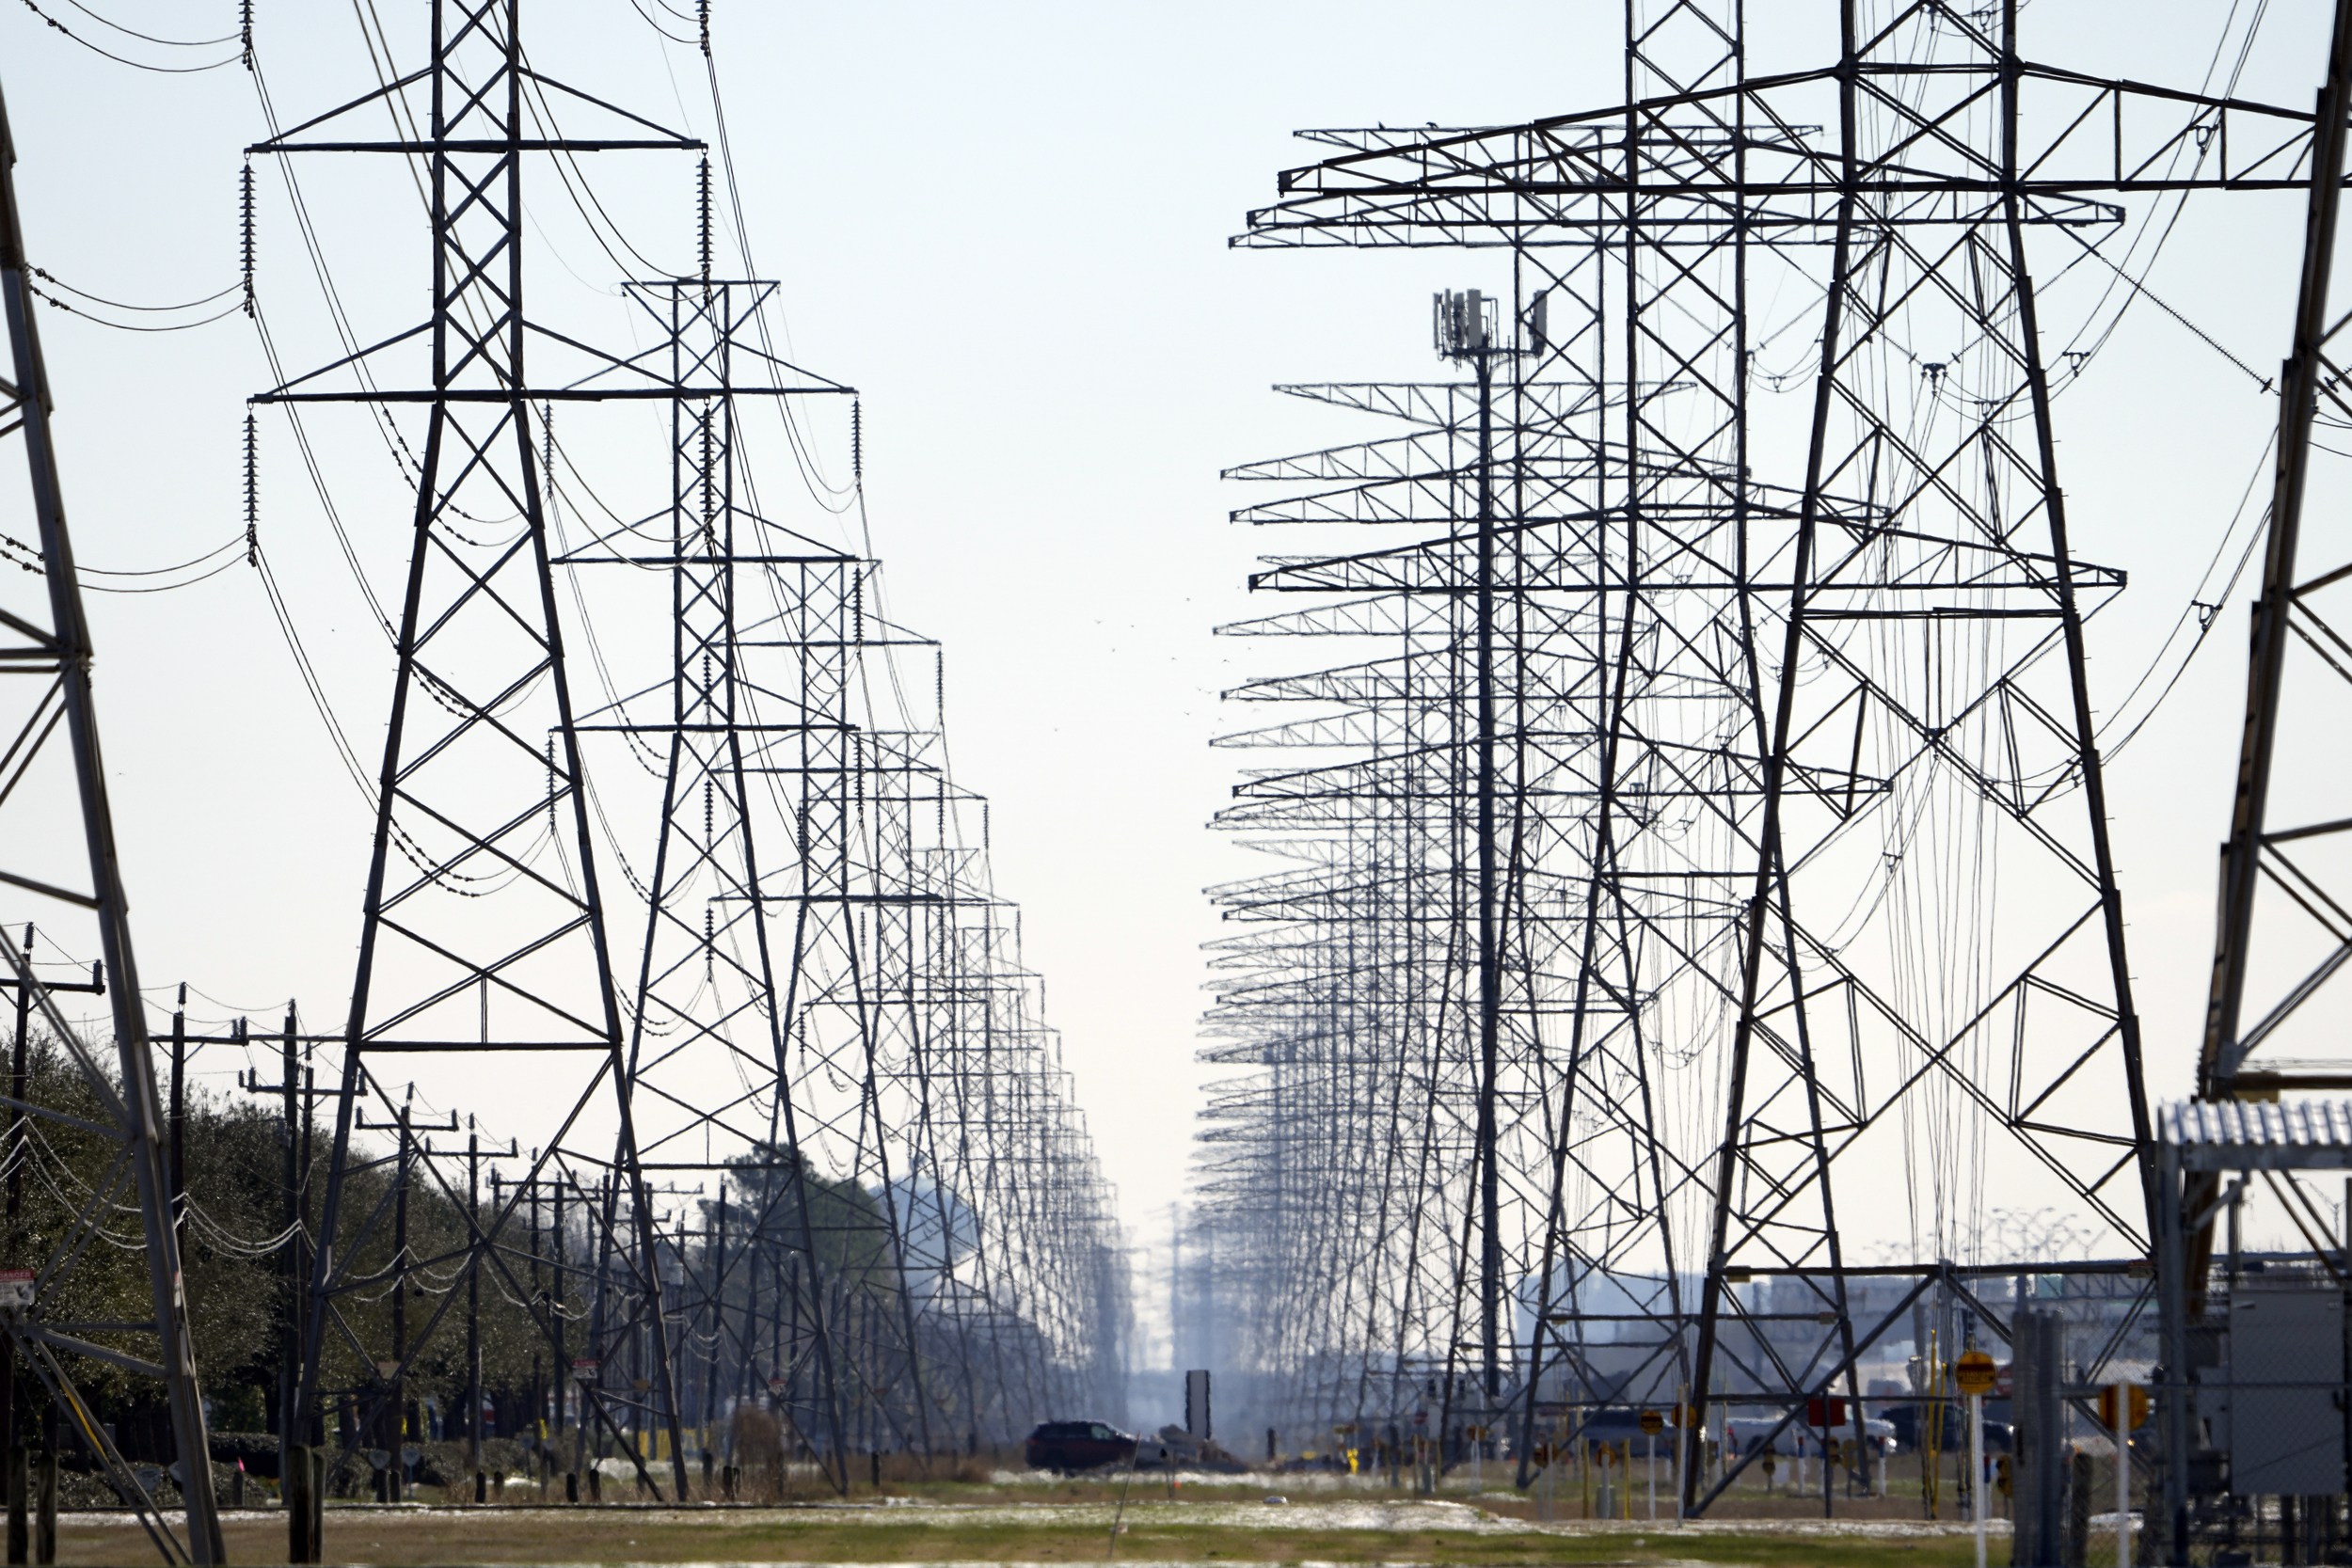 Texas power outages are a wake-up call for strong utility regulation - Bangor Daily News